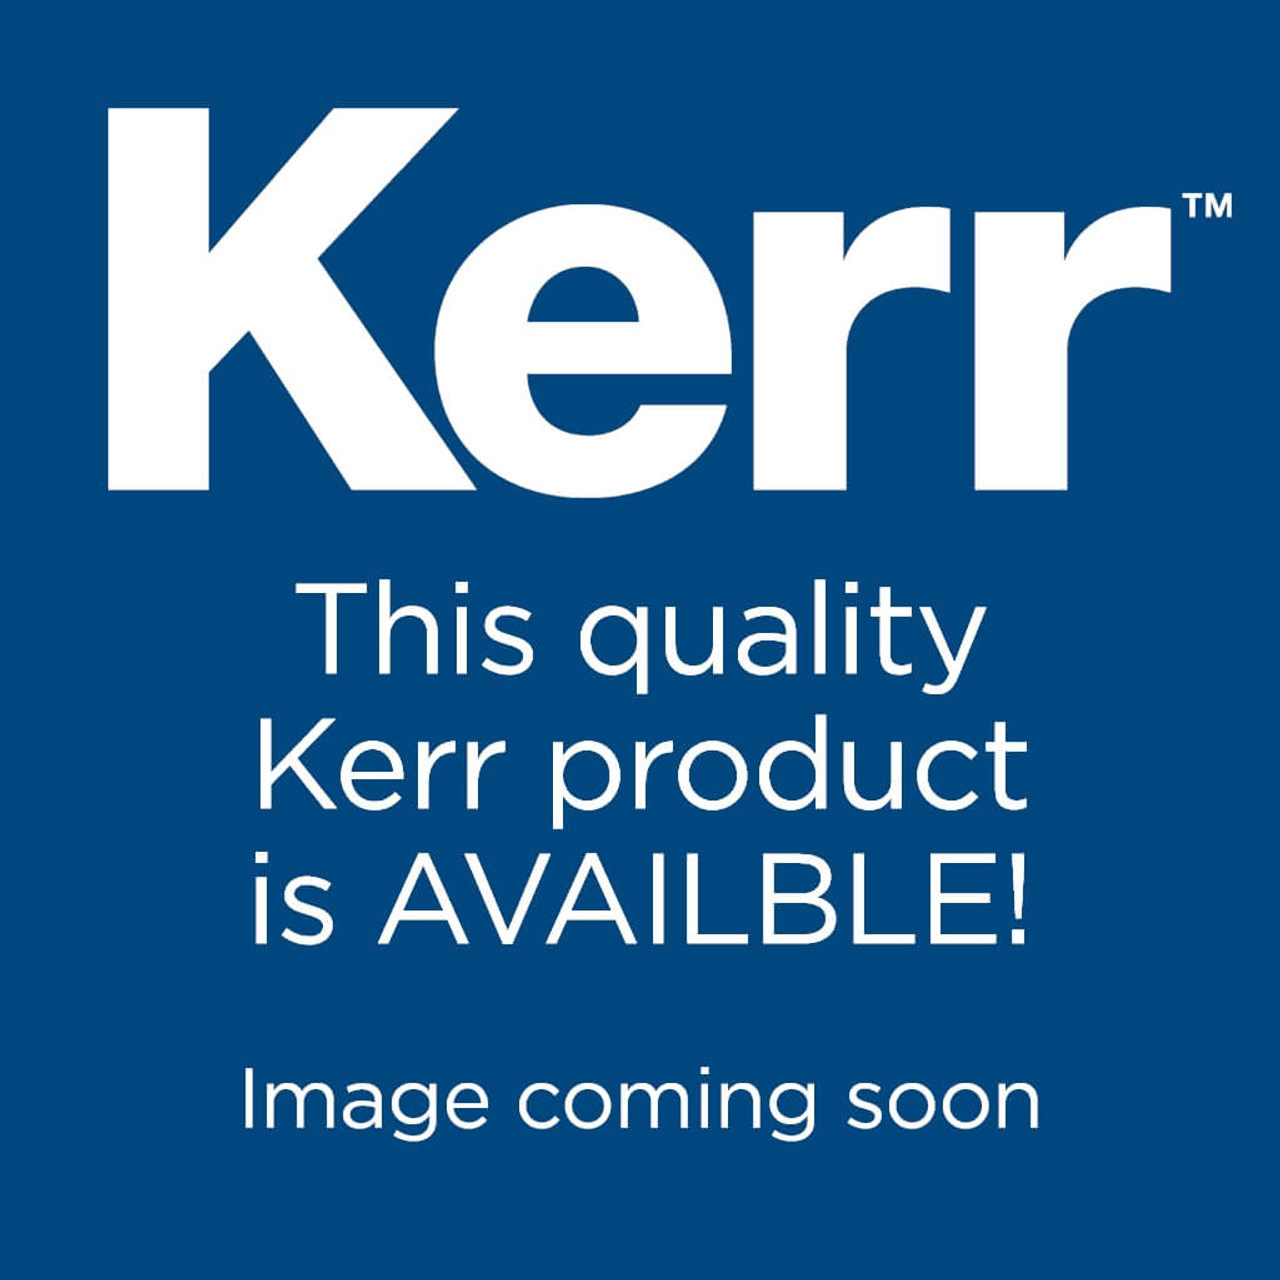 M4 SAFETY LOW SPEED ENDO CONTRA ANGLE HANDPIECE, 25846, Kerr Dental